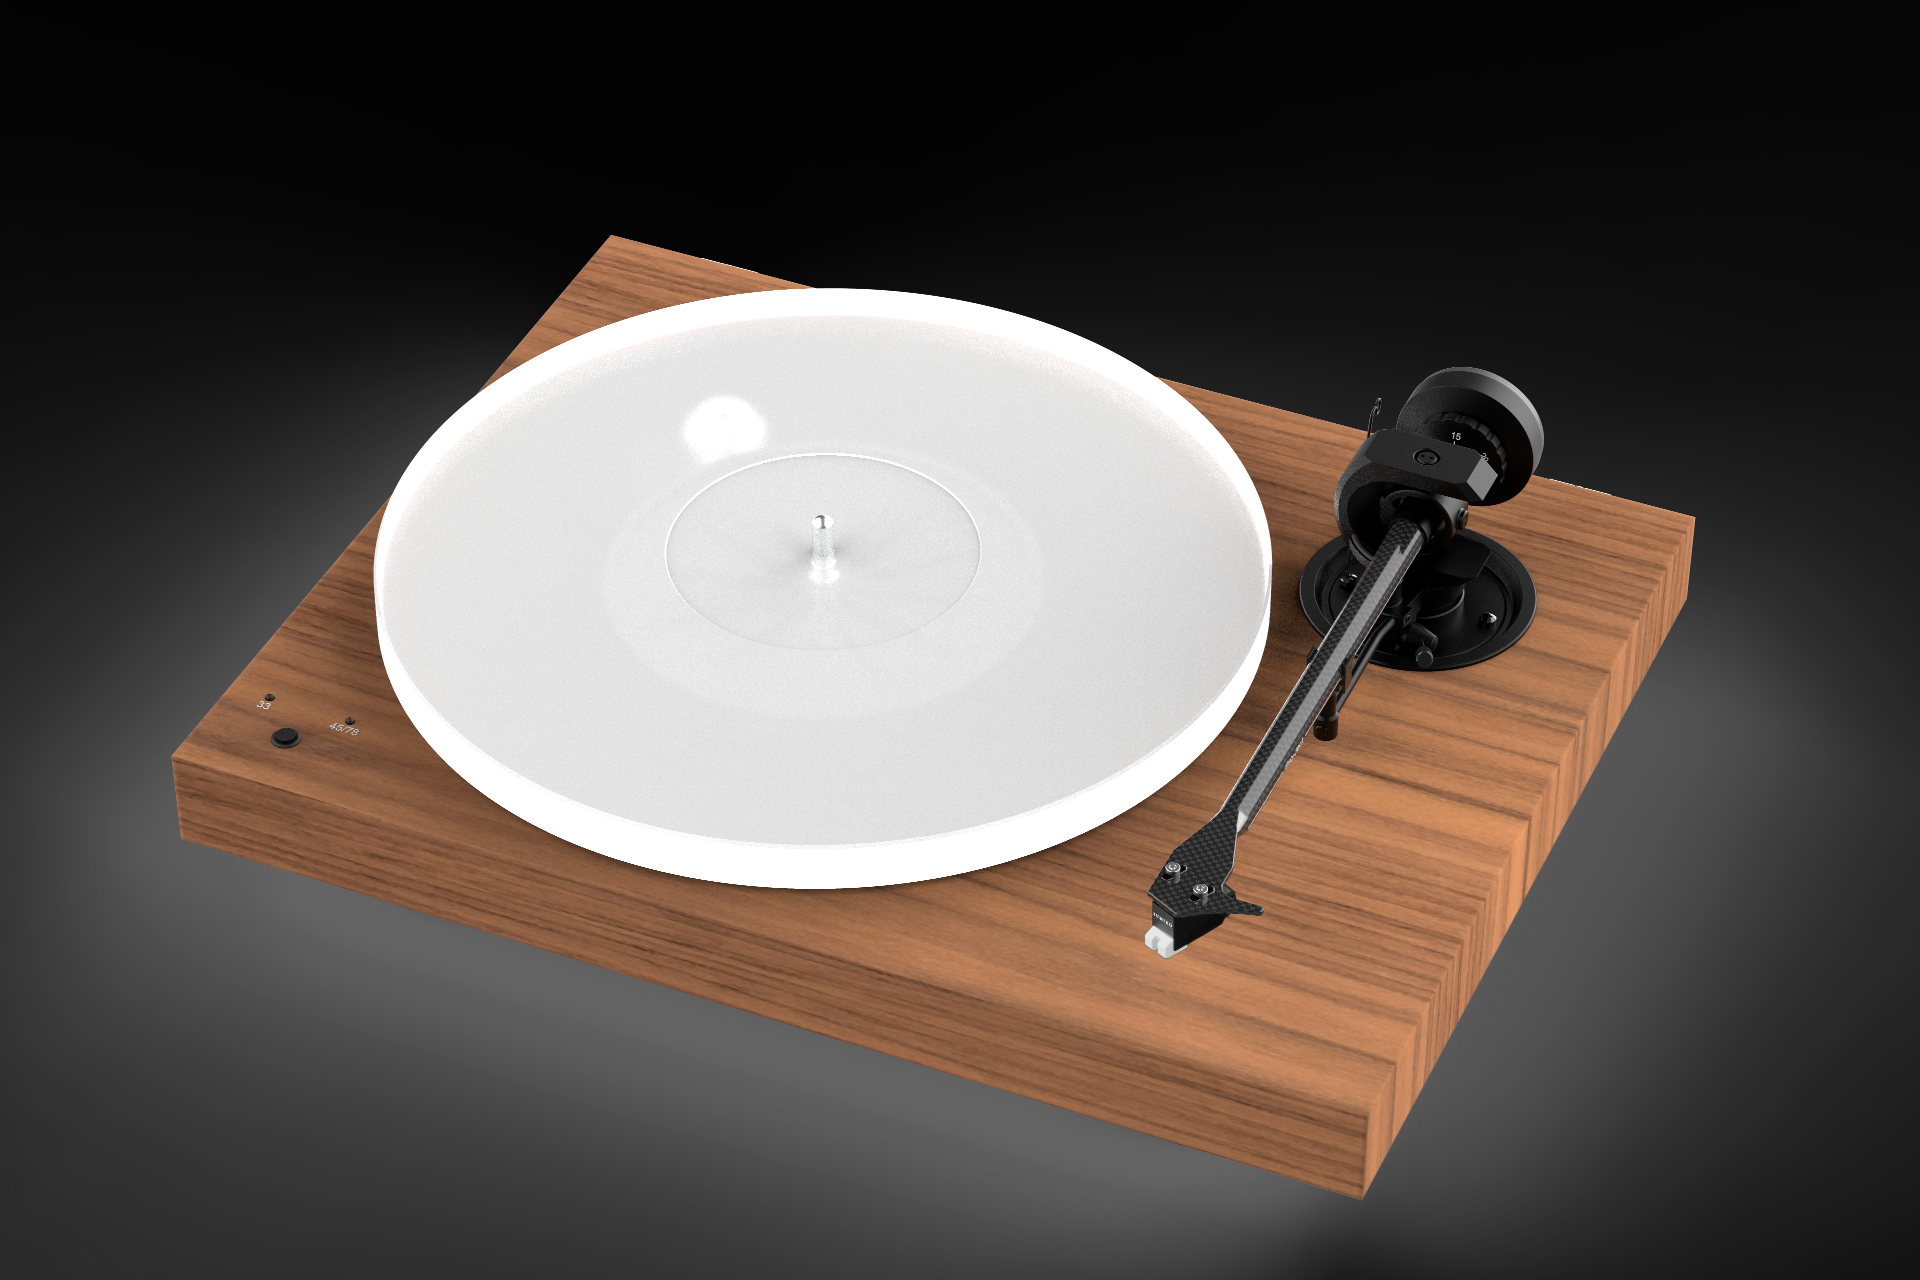 Pro-Ject's new turntables promise superior noise suppression